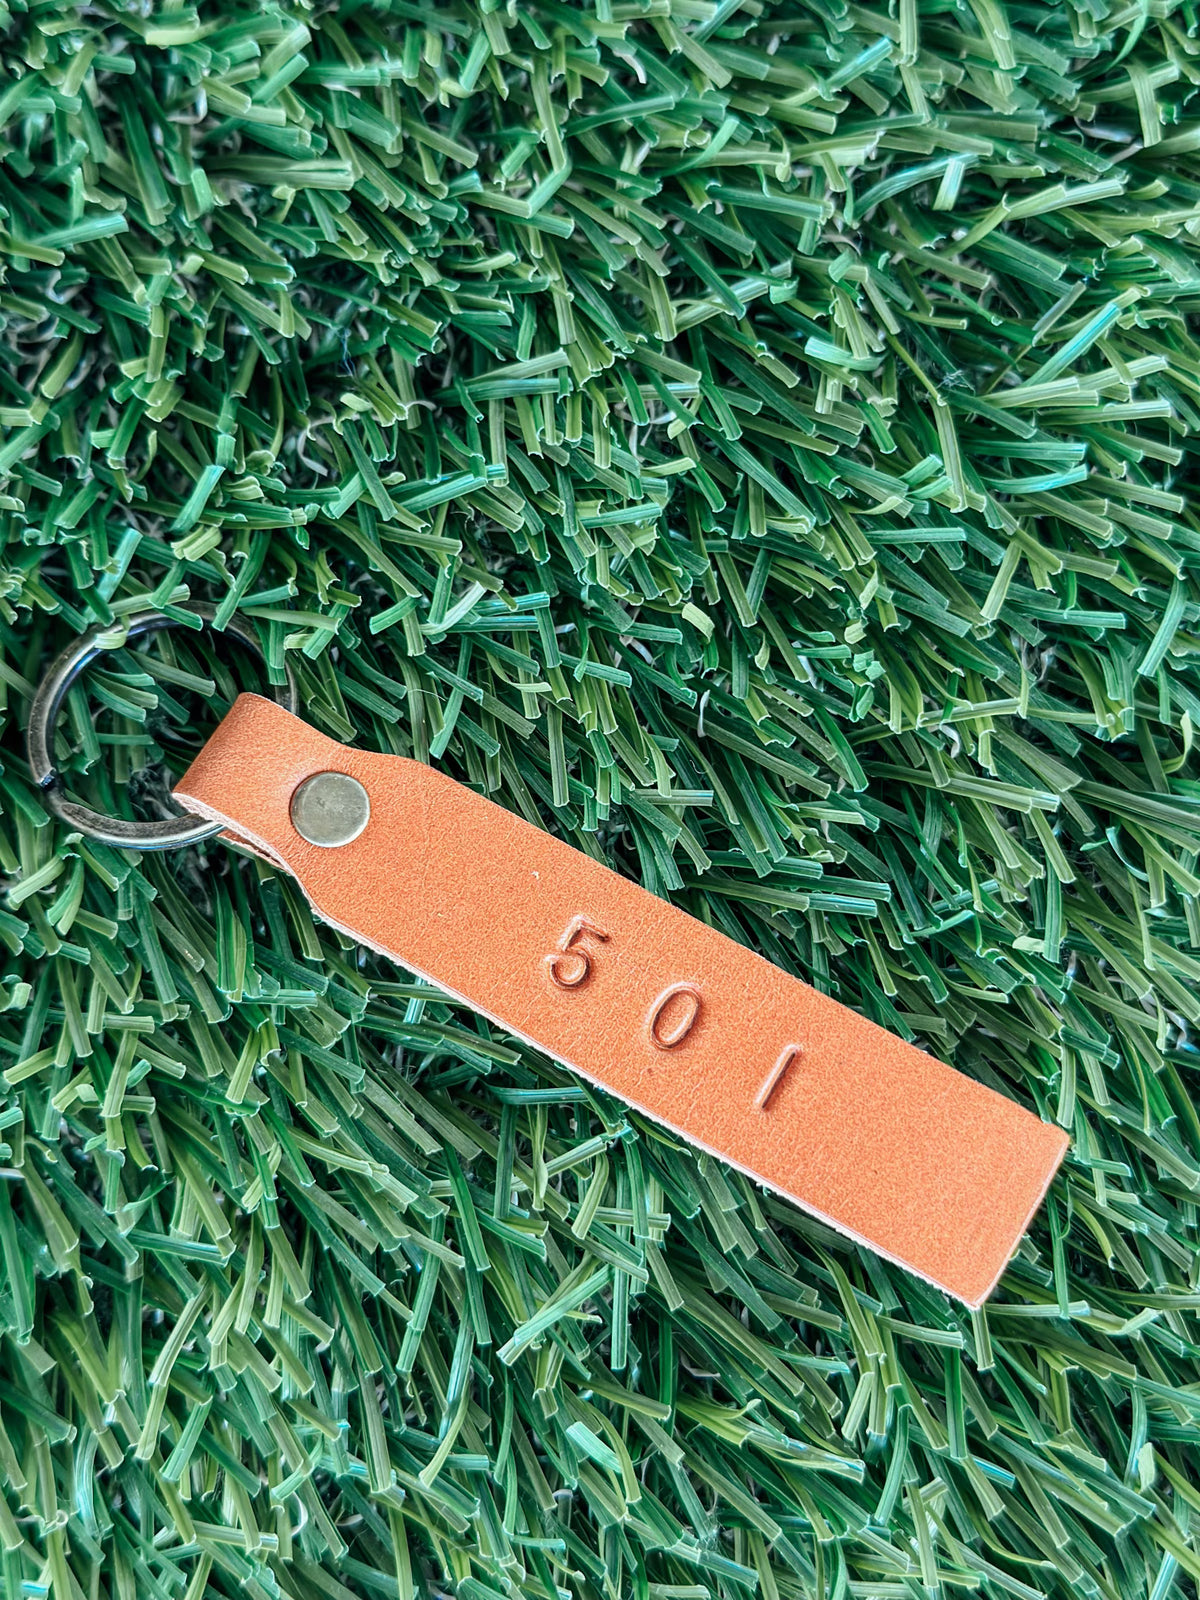 Arkansas Area Code Stamped Leather Keychain